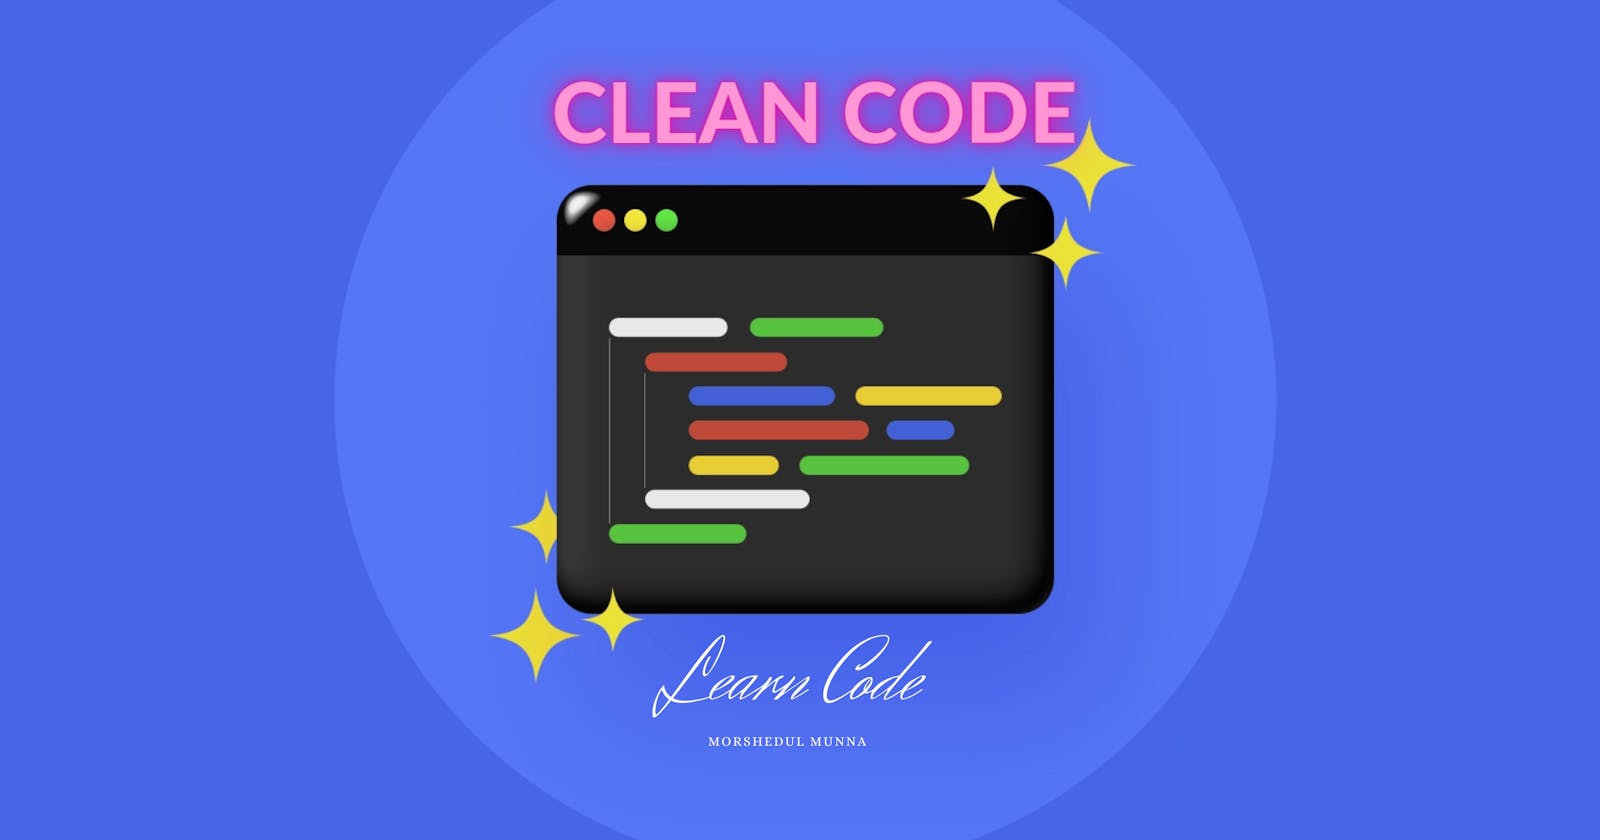 What is Clean Code? - Clean Code Explanation.